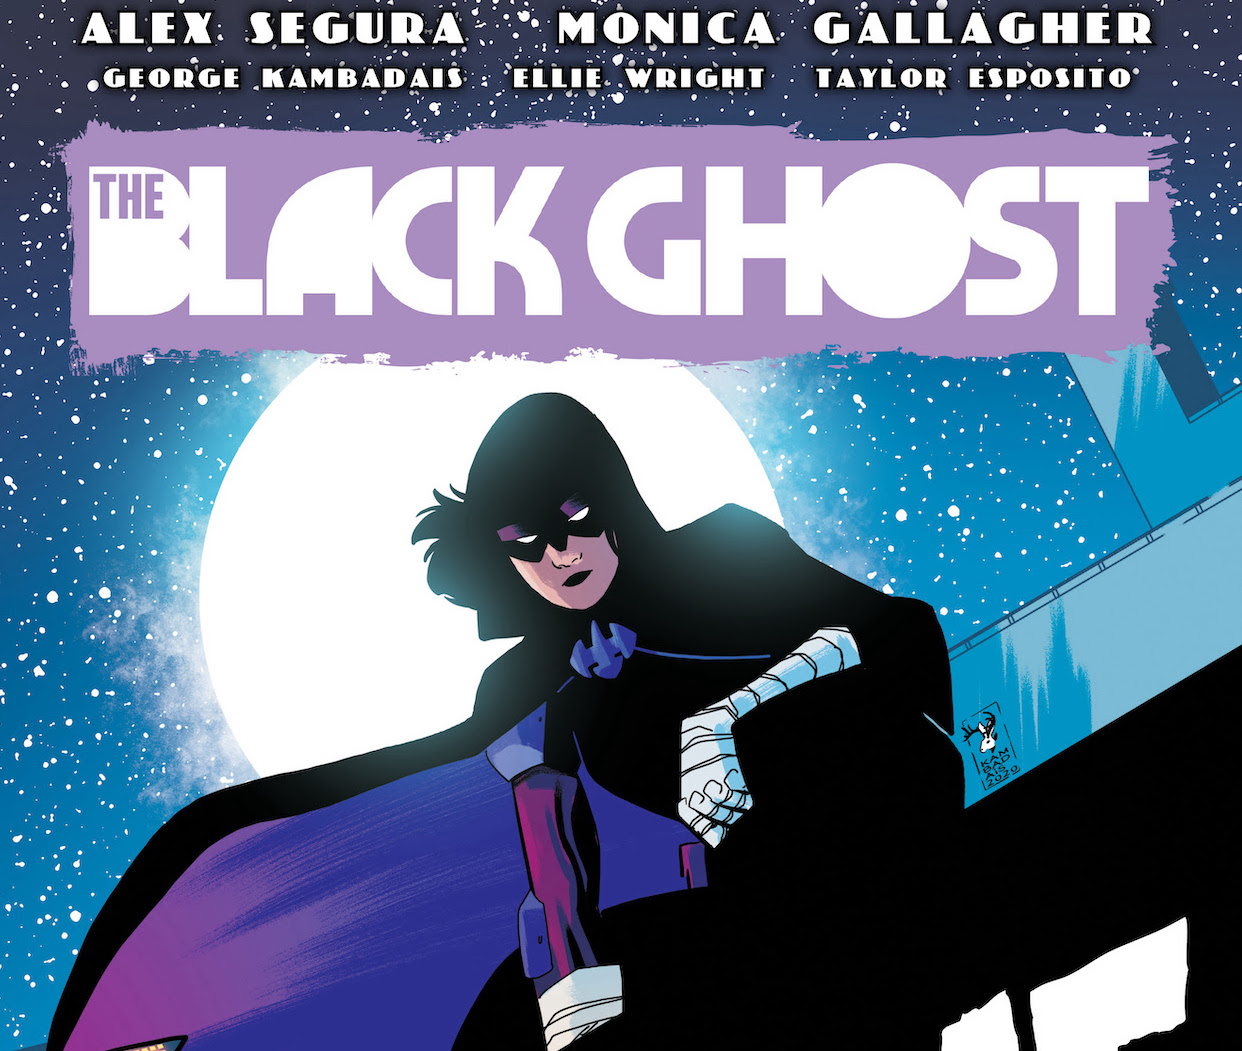 'The Black Ghost' Vol. 2 arrives in paperback January 2023